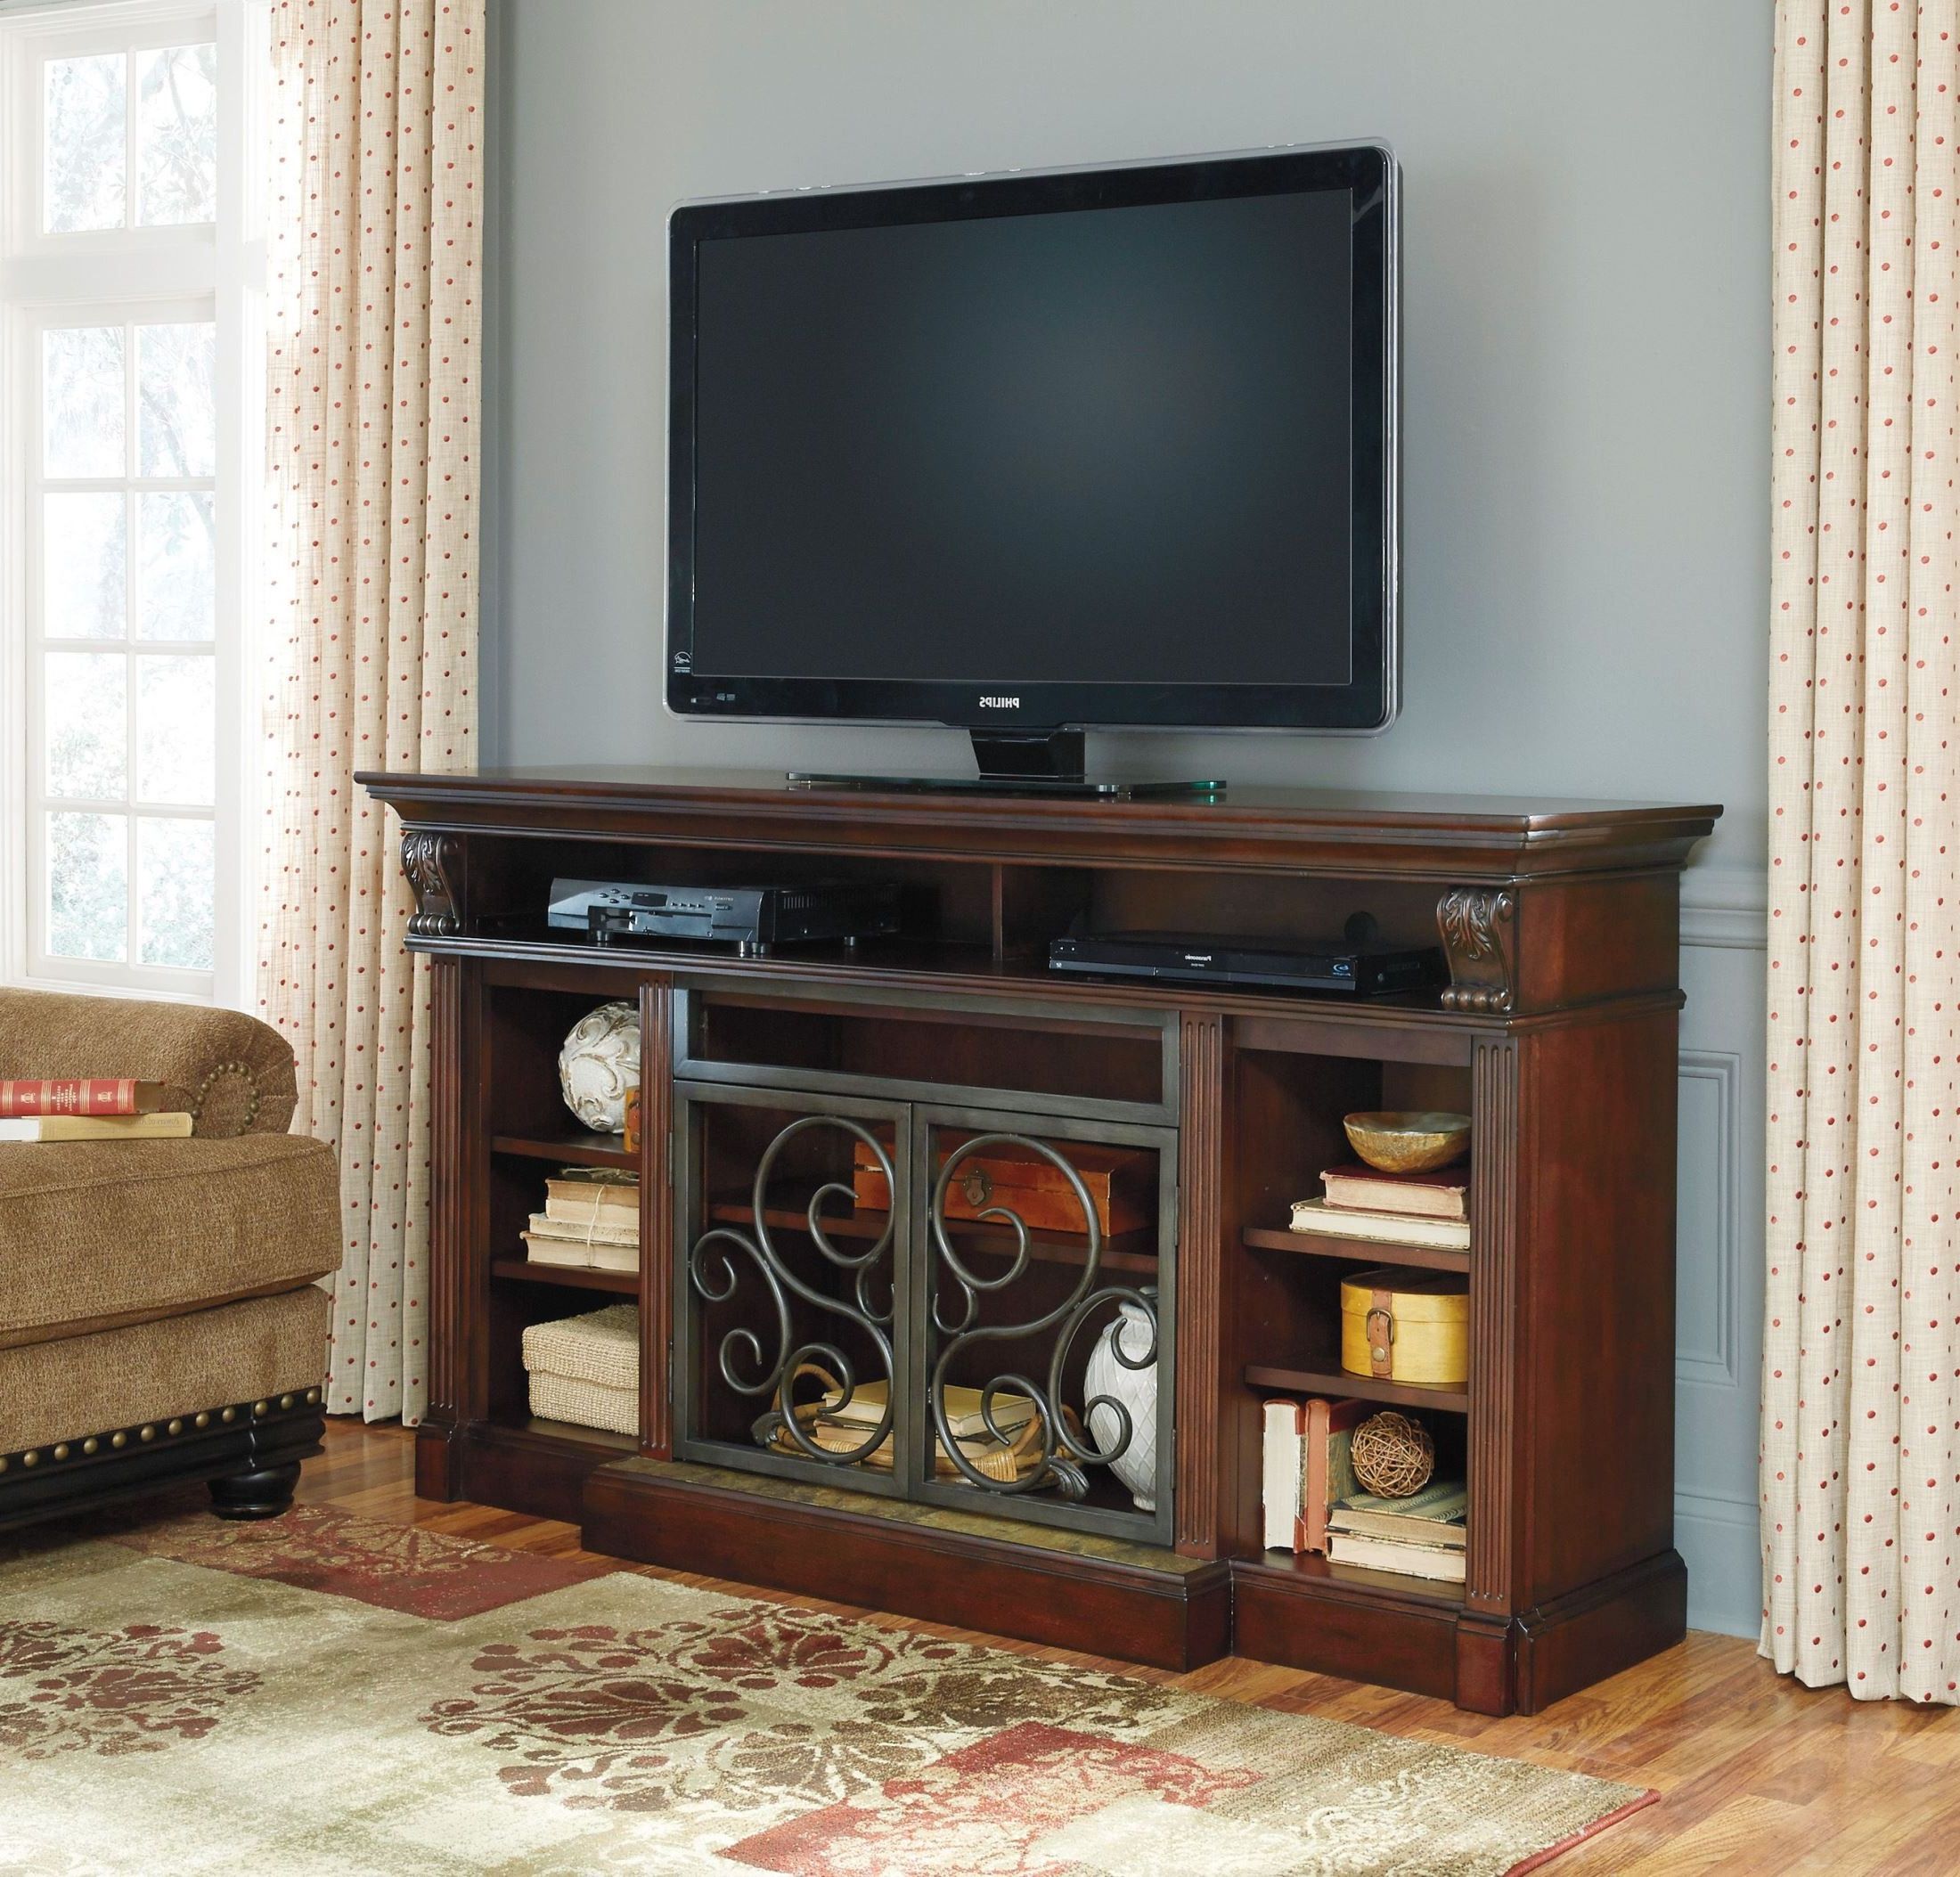 Alymere Extra Large Tv Stand With Fireplace Insert From Inside Carbon Extra Wide Tv Unit Stands (View 9 of 20)